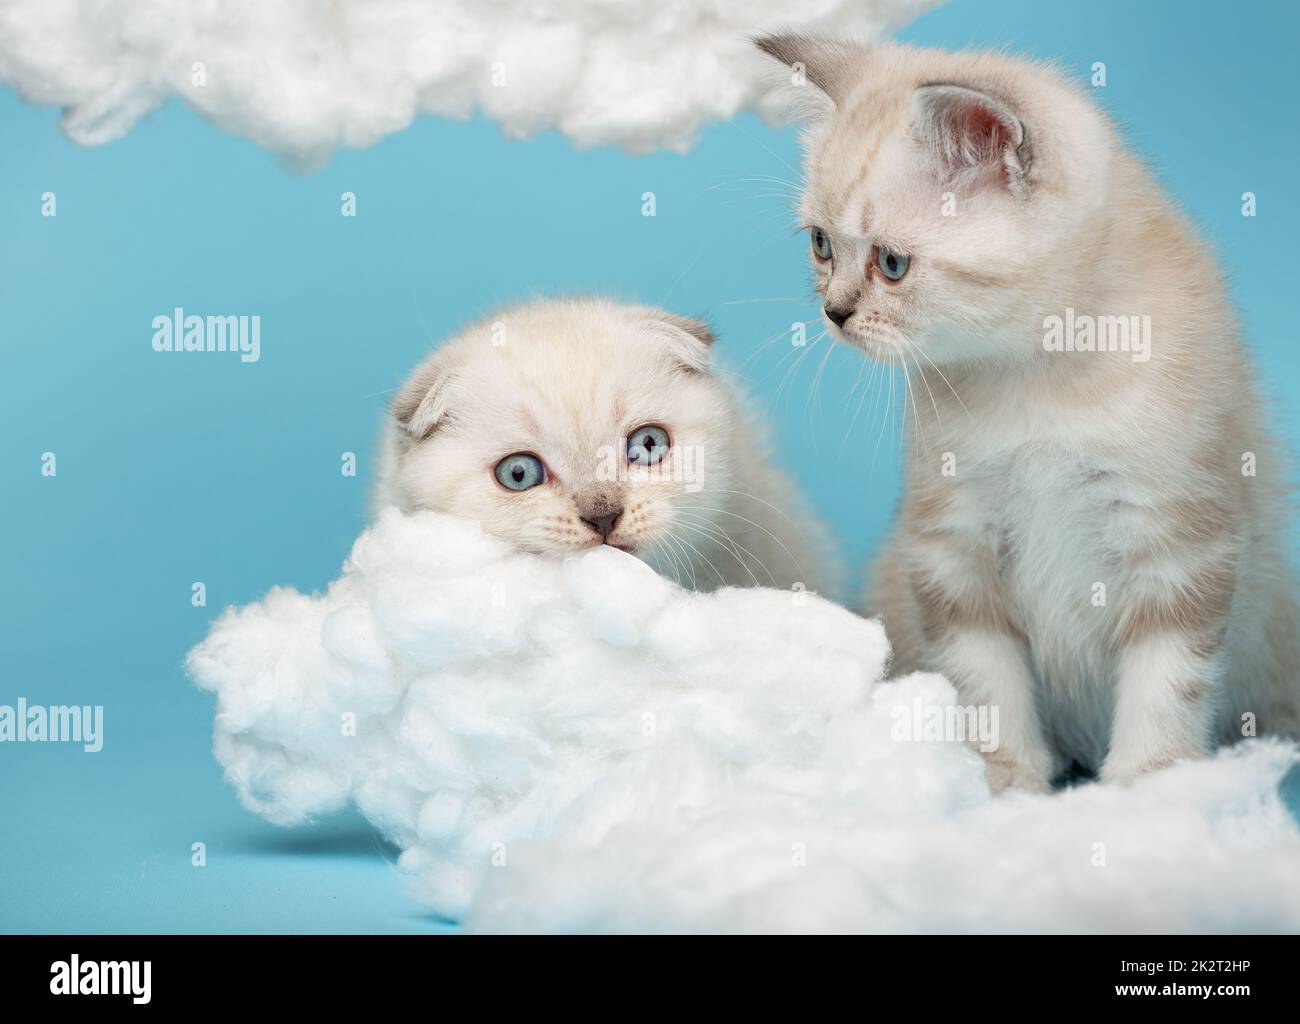 Small kitten watching as another kitten is about to gnaw a cotton cloud on a blue background. Stock Photo